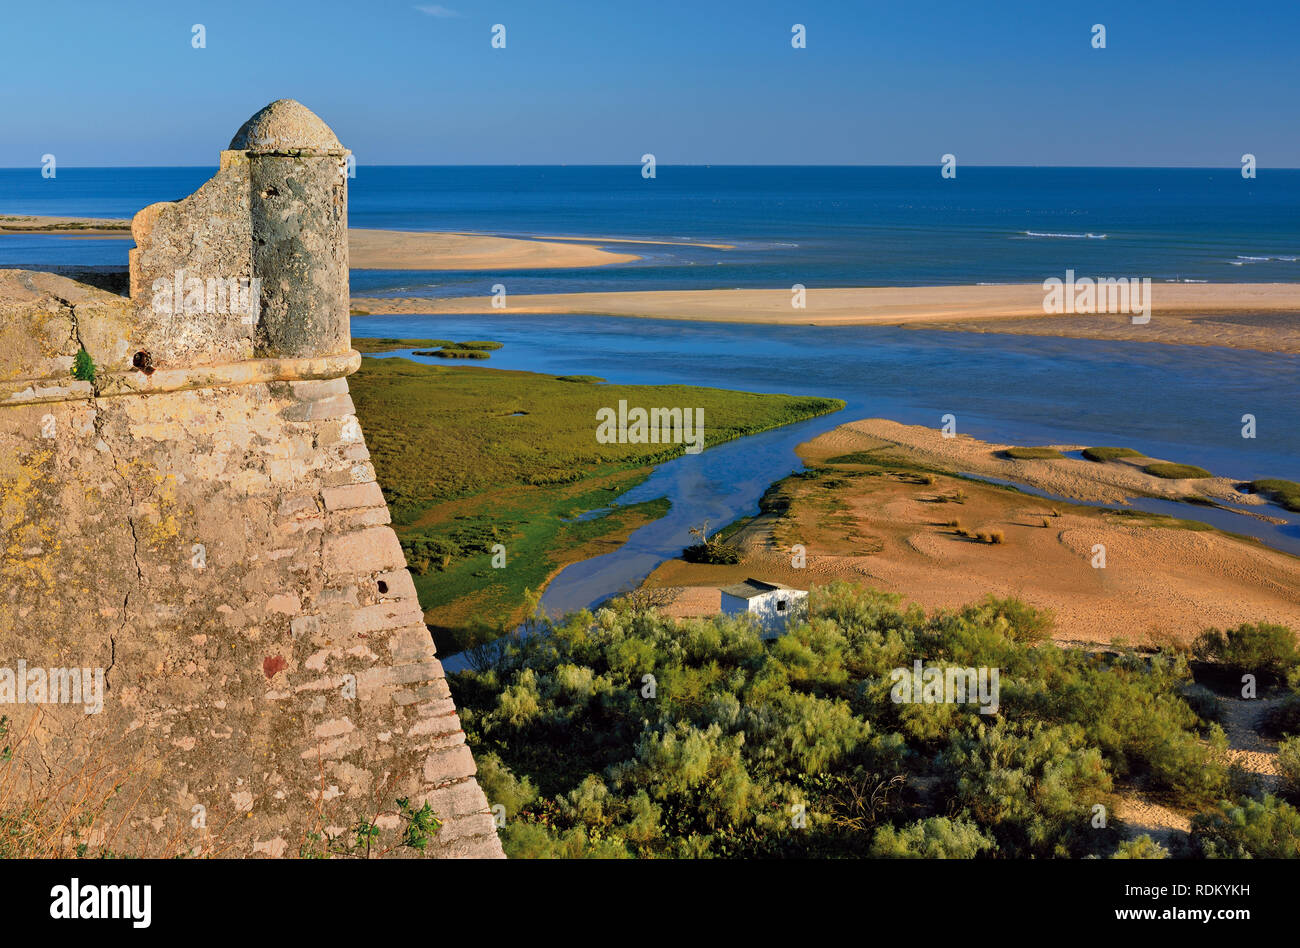 Watch tower of medieveal fortress overlooking coastal landscape with barrier islands and lagoons Stock Photo